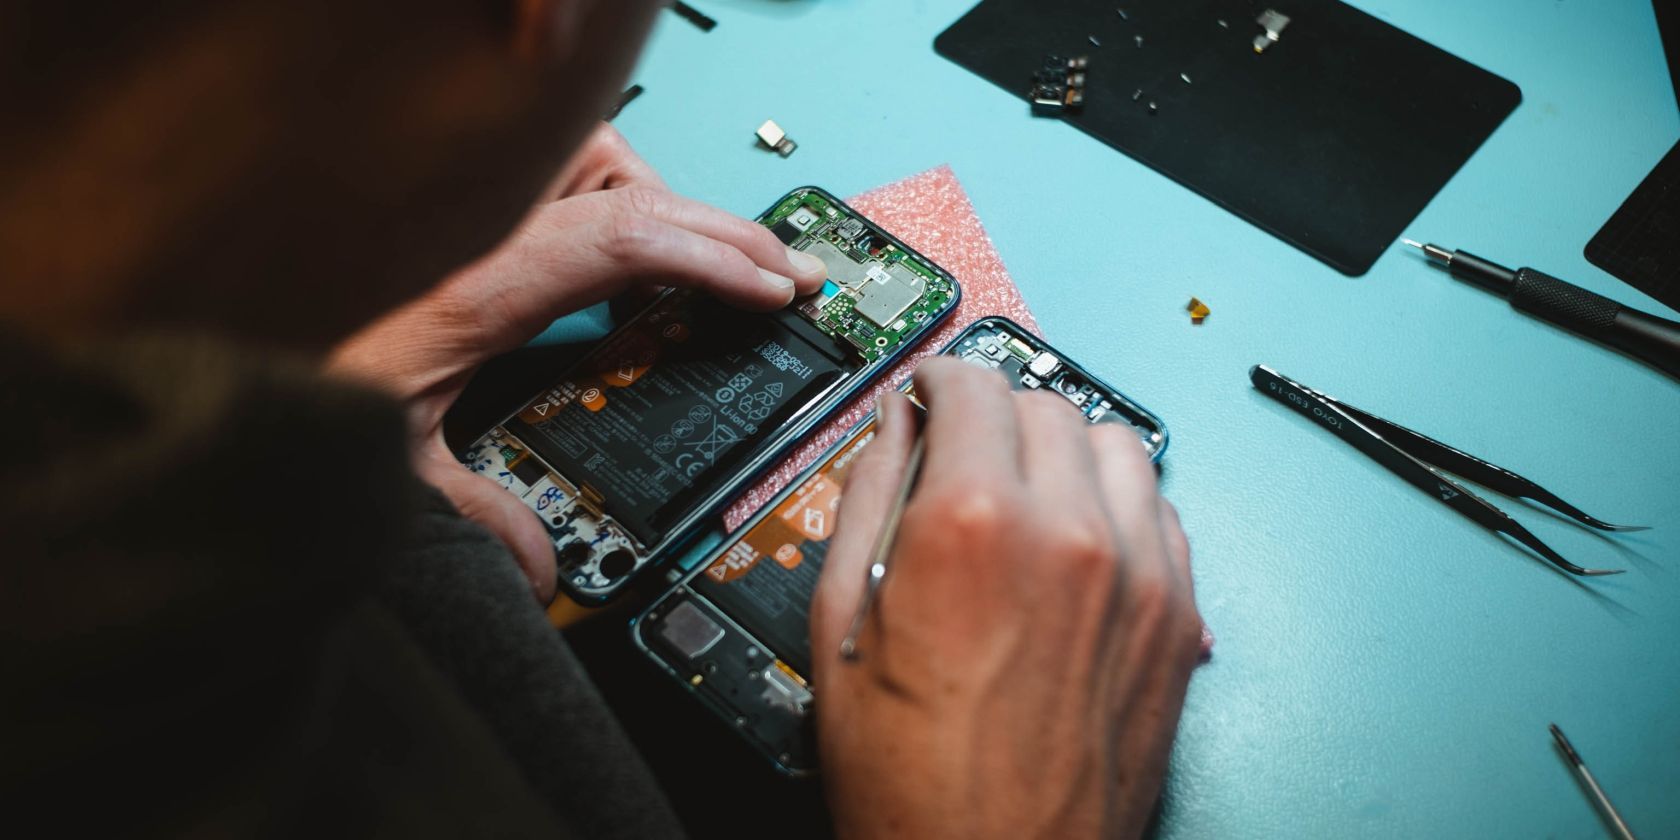 You'll Soon Be Able to Repair Your Samsung Galaxy Device Yourself